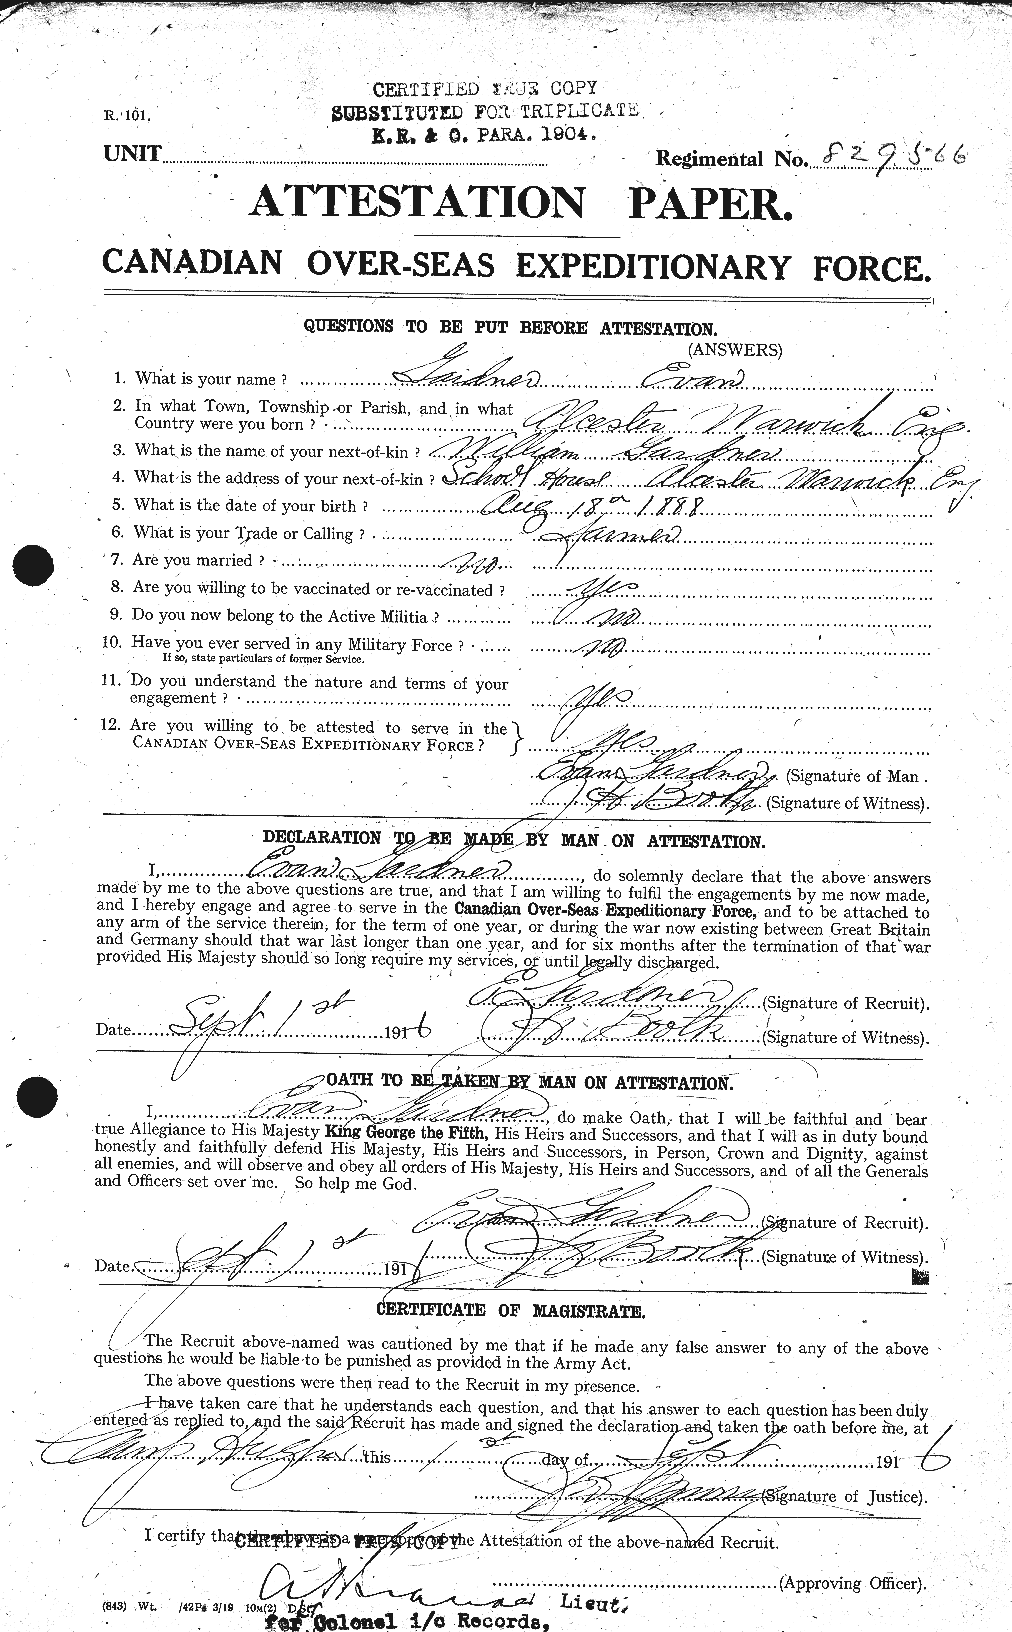 Personnel Records of the First World War - CEF 341009a